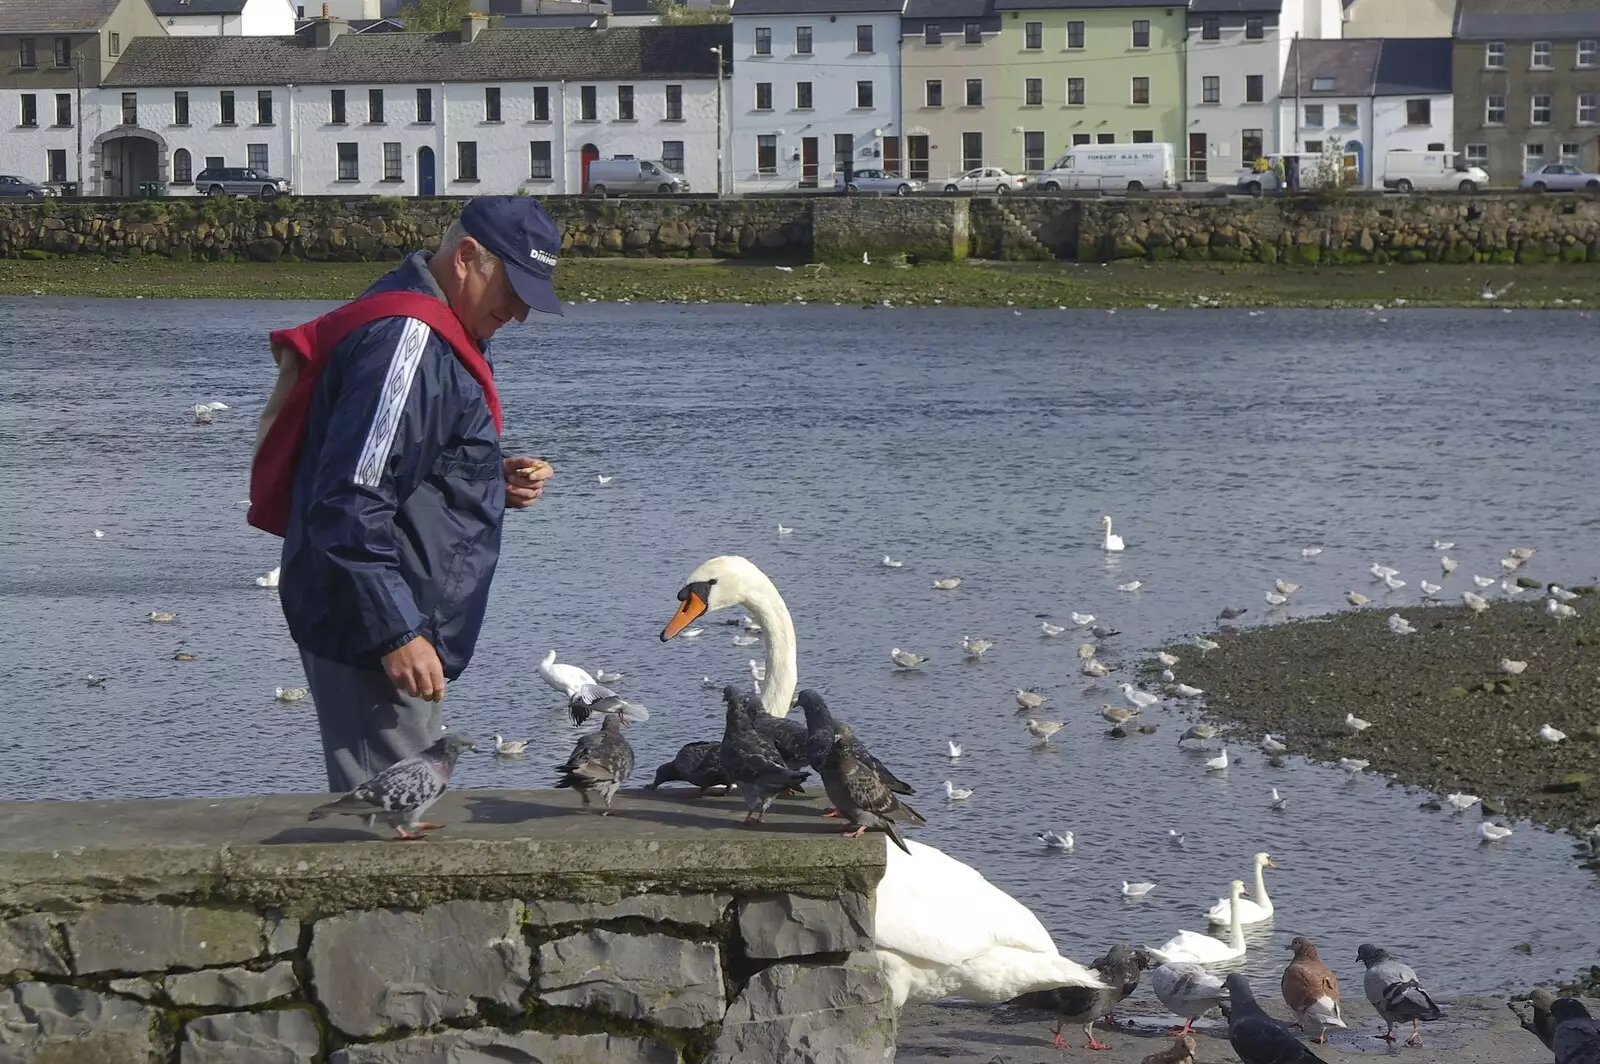 Some dude feeds the swans, from Kilkee to Galway, Connacht, Ireland - 23rd September 2007